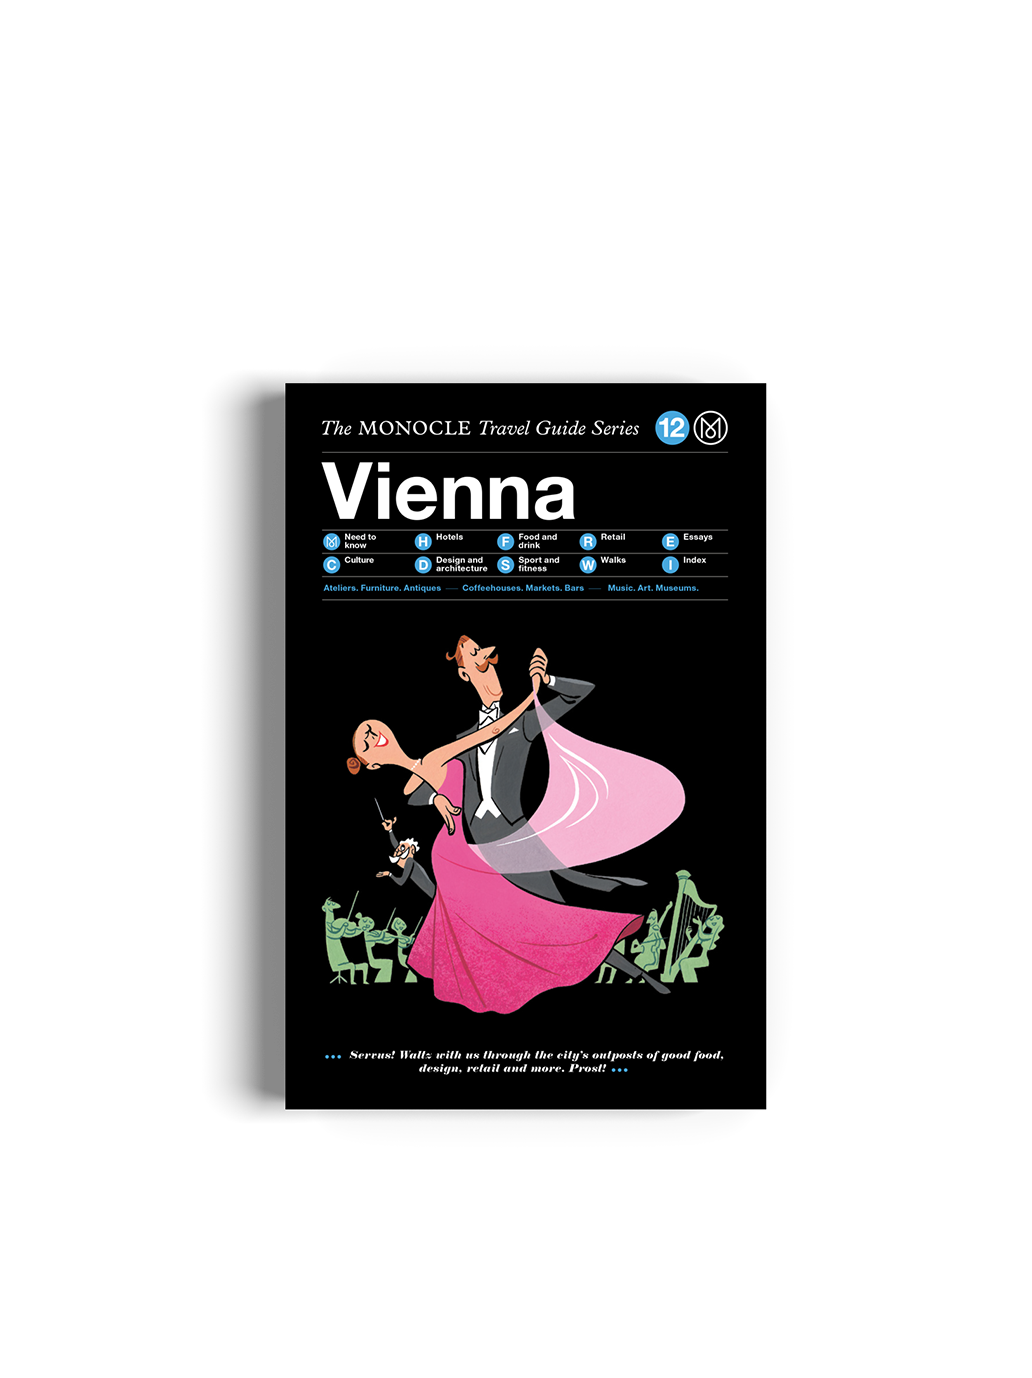 VIENNA: THE MONOCLE TRAVEL GUIDE SERIES